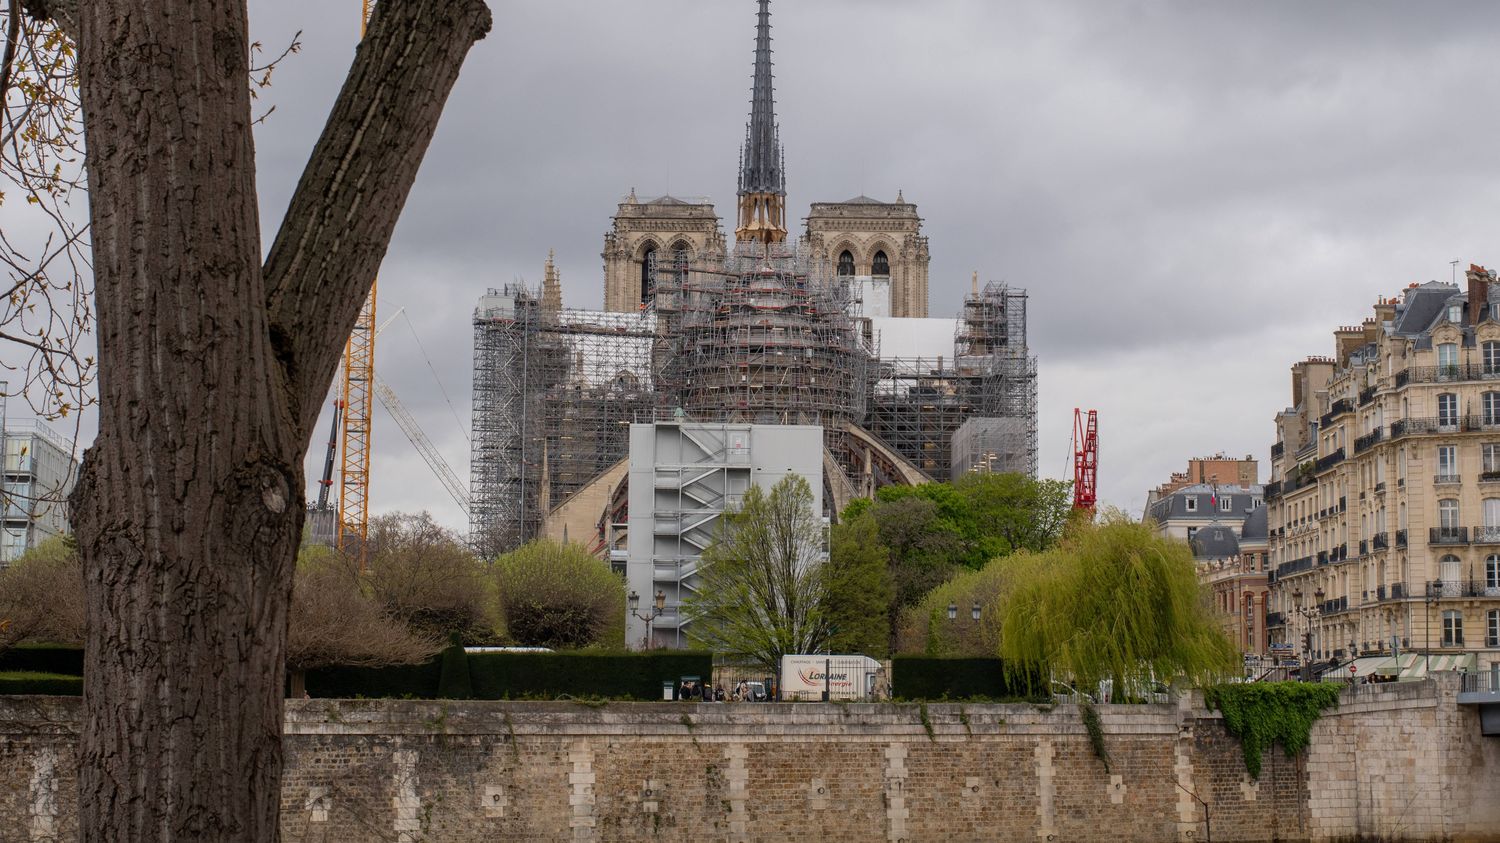 Notre-Dame de Paris: five years after the fire, major reconstruction challenges are faced, according to Philippe Jost, site manager